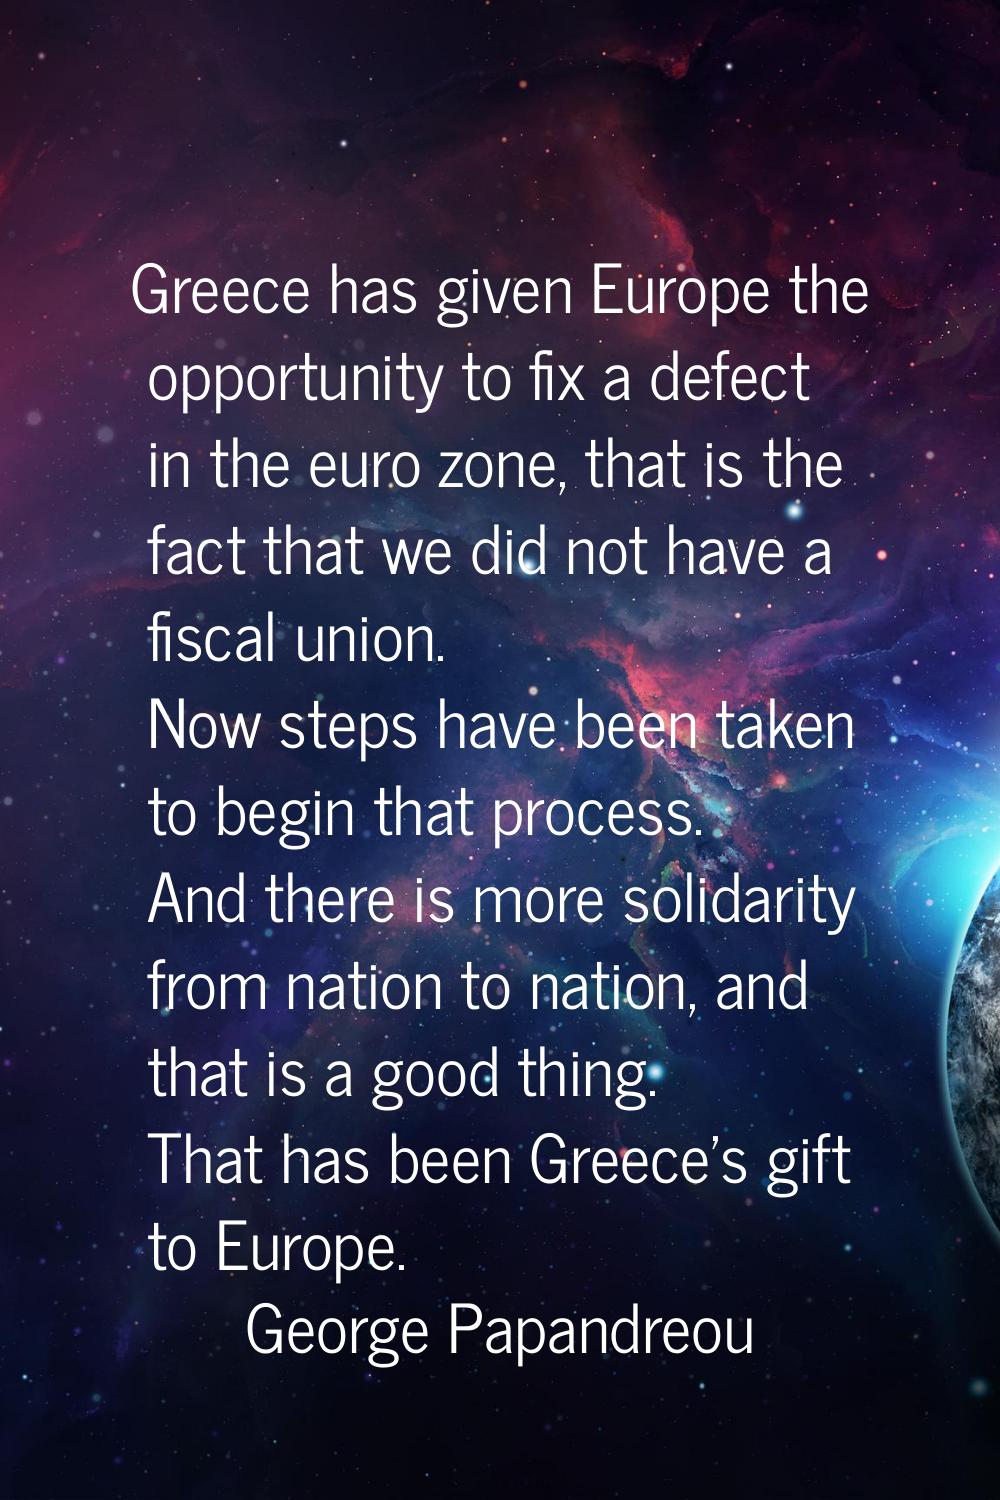 Greece has given Europe the opportunity to fix a defect in the euro zone, that is the fact that we 